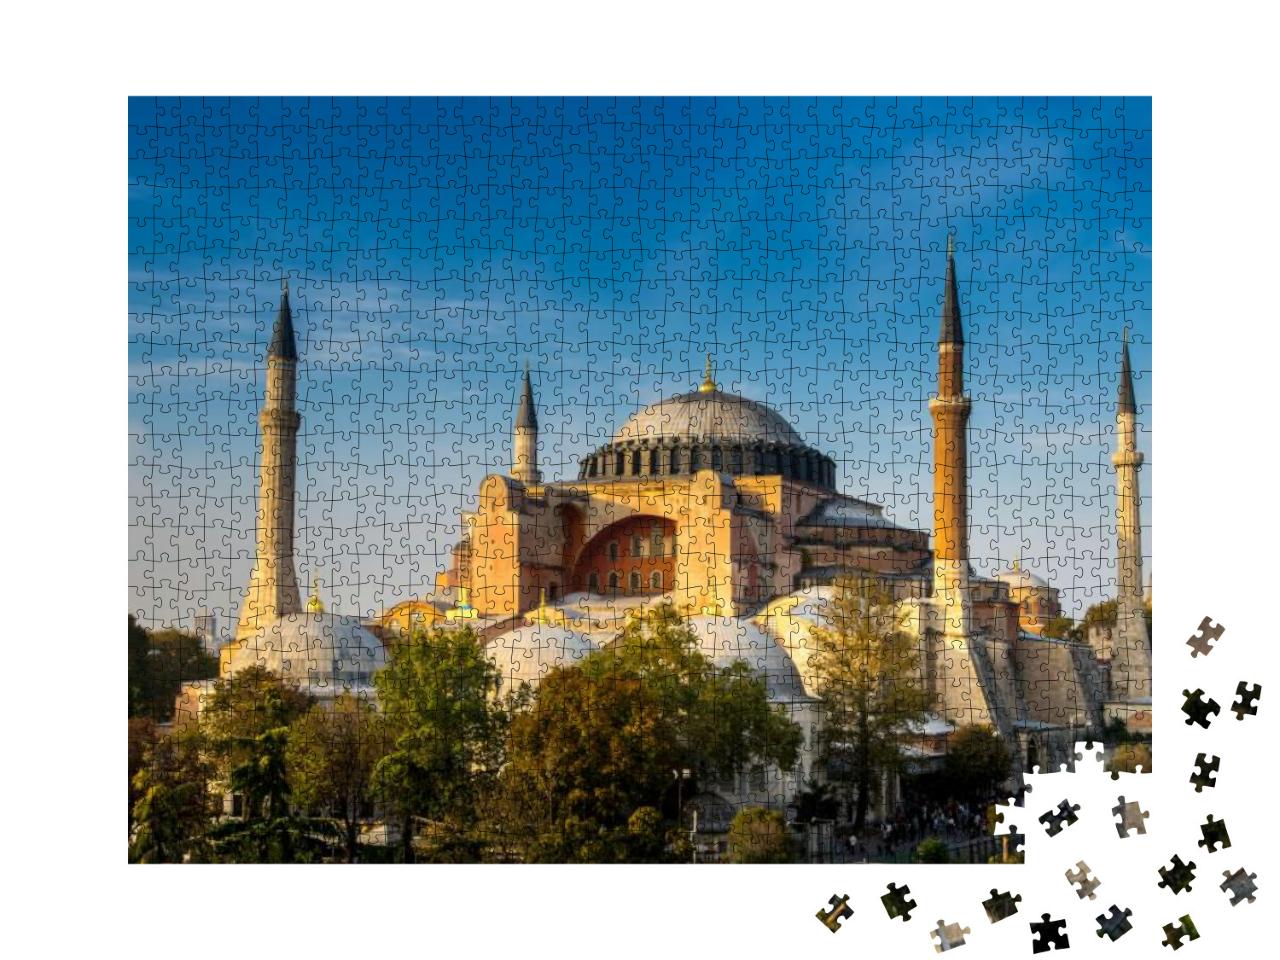 View of Hagia Sofia, the Famous Landmark of Istanbul Turk... Jigsaw Puzzle with 1000 pieces